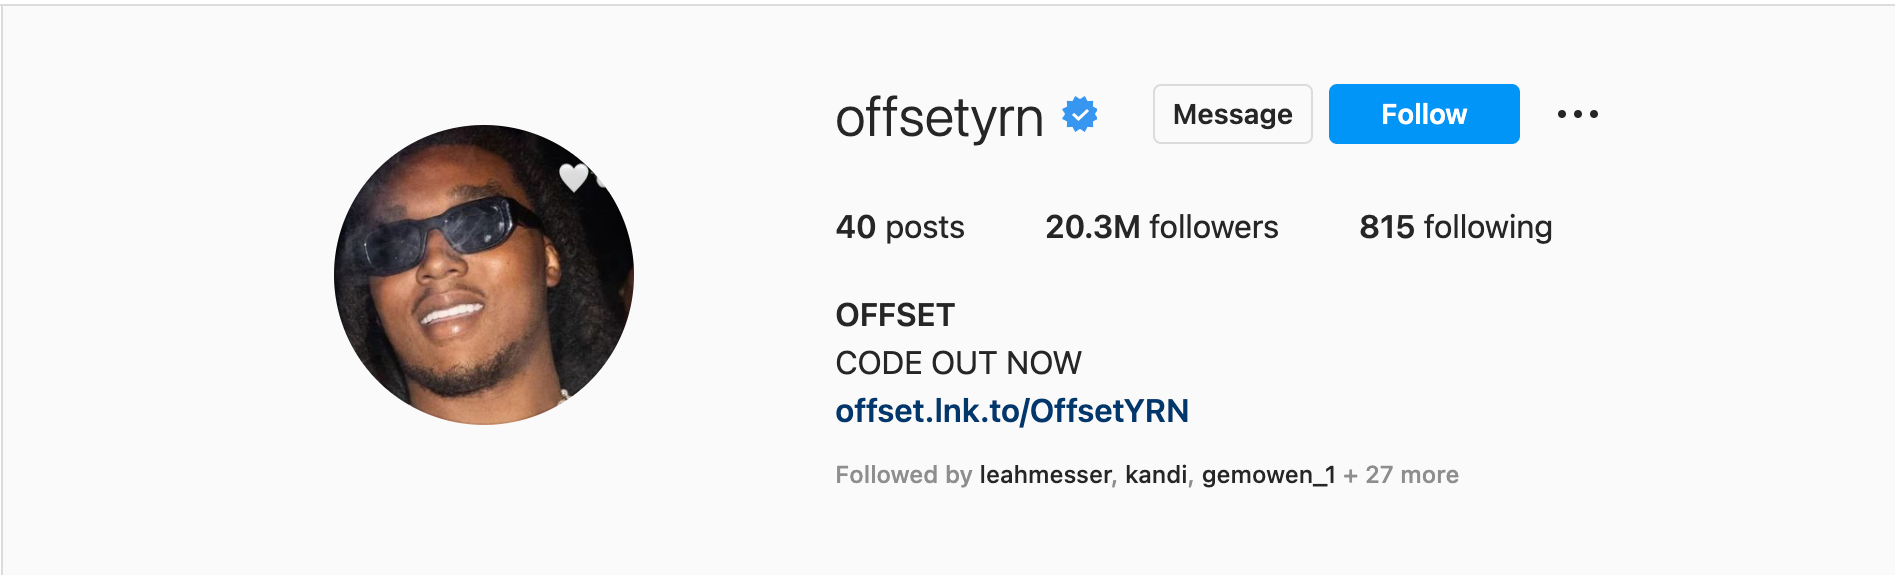 Offset Finally Reacts To Takeoff's Murder Amid Backlash From Twitter